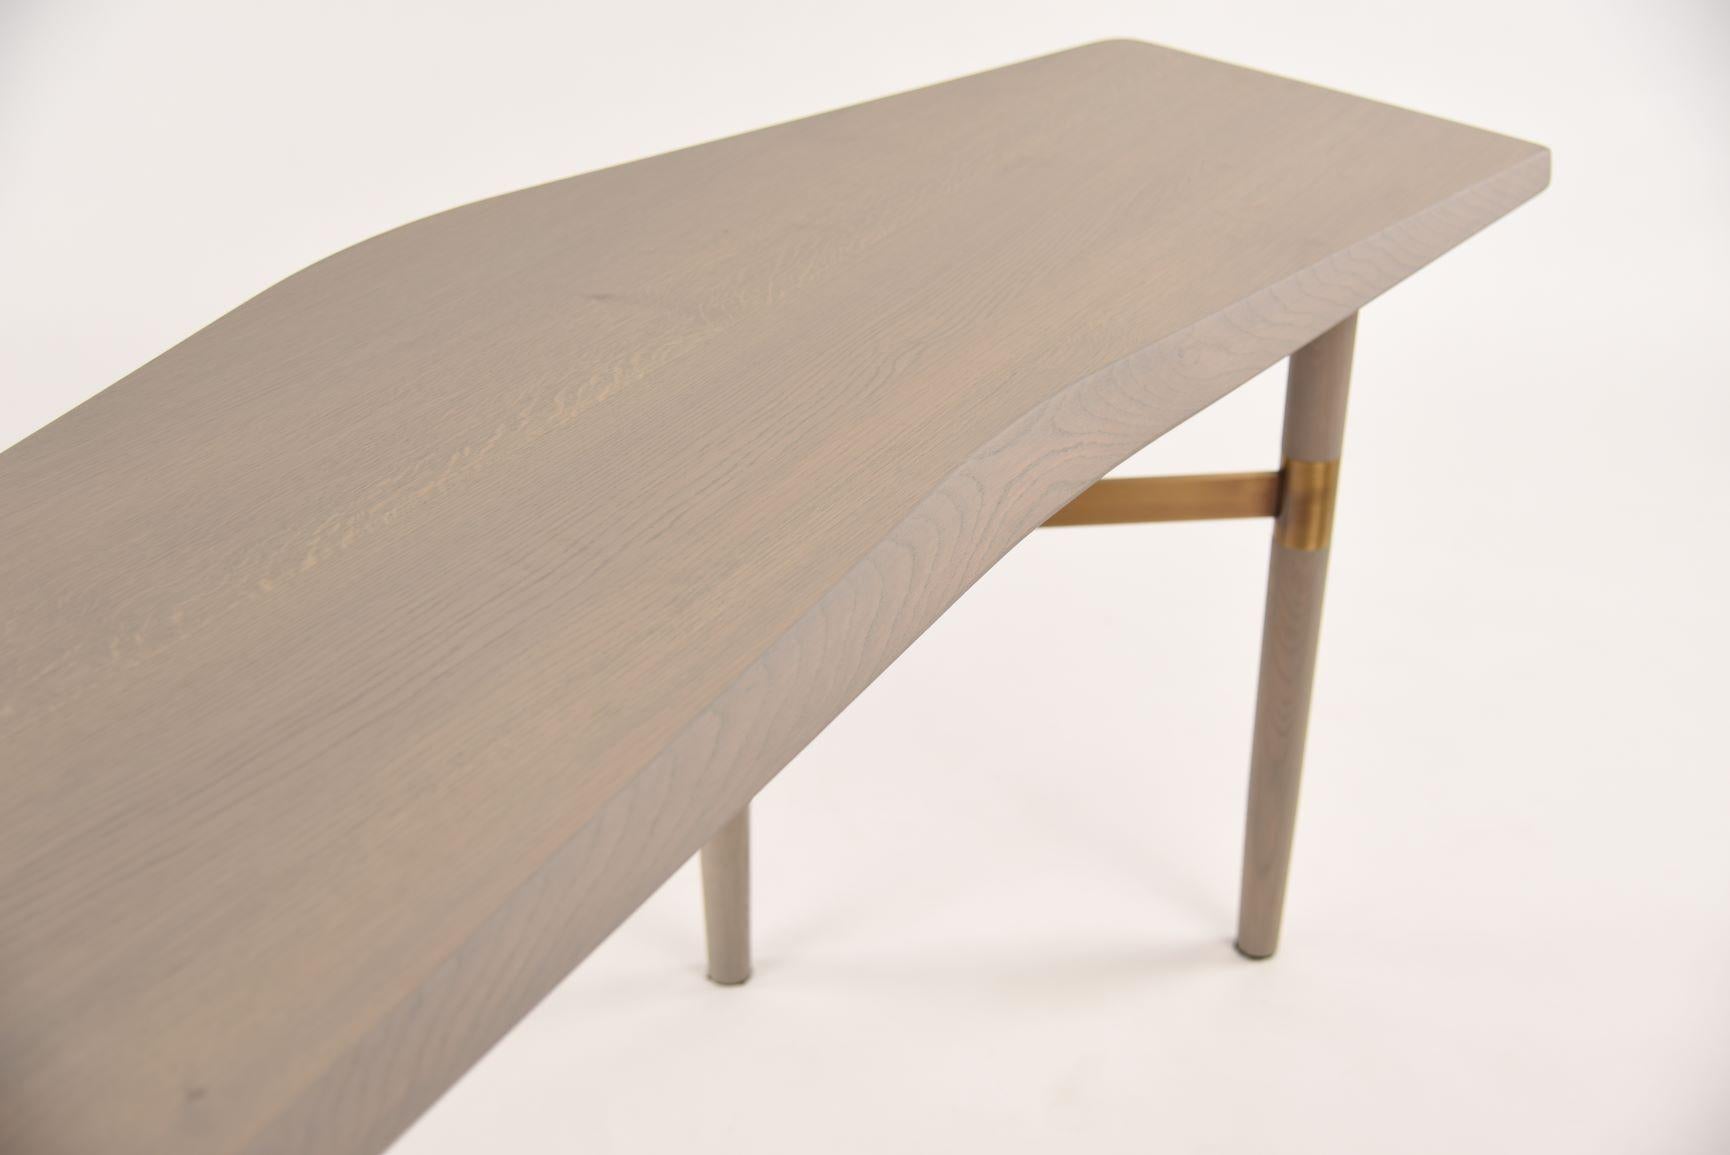 Dutch Darling Point Desk by Yabu Pushelberg in Nude Matte Lacquered Oak and Brass For Sale